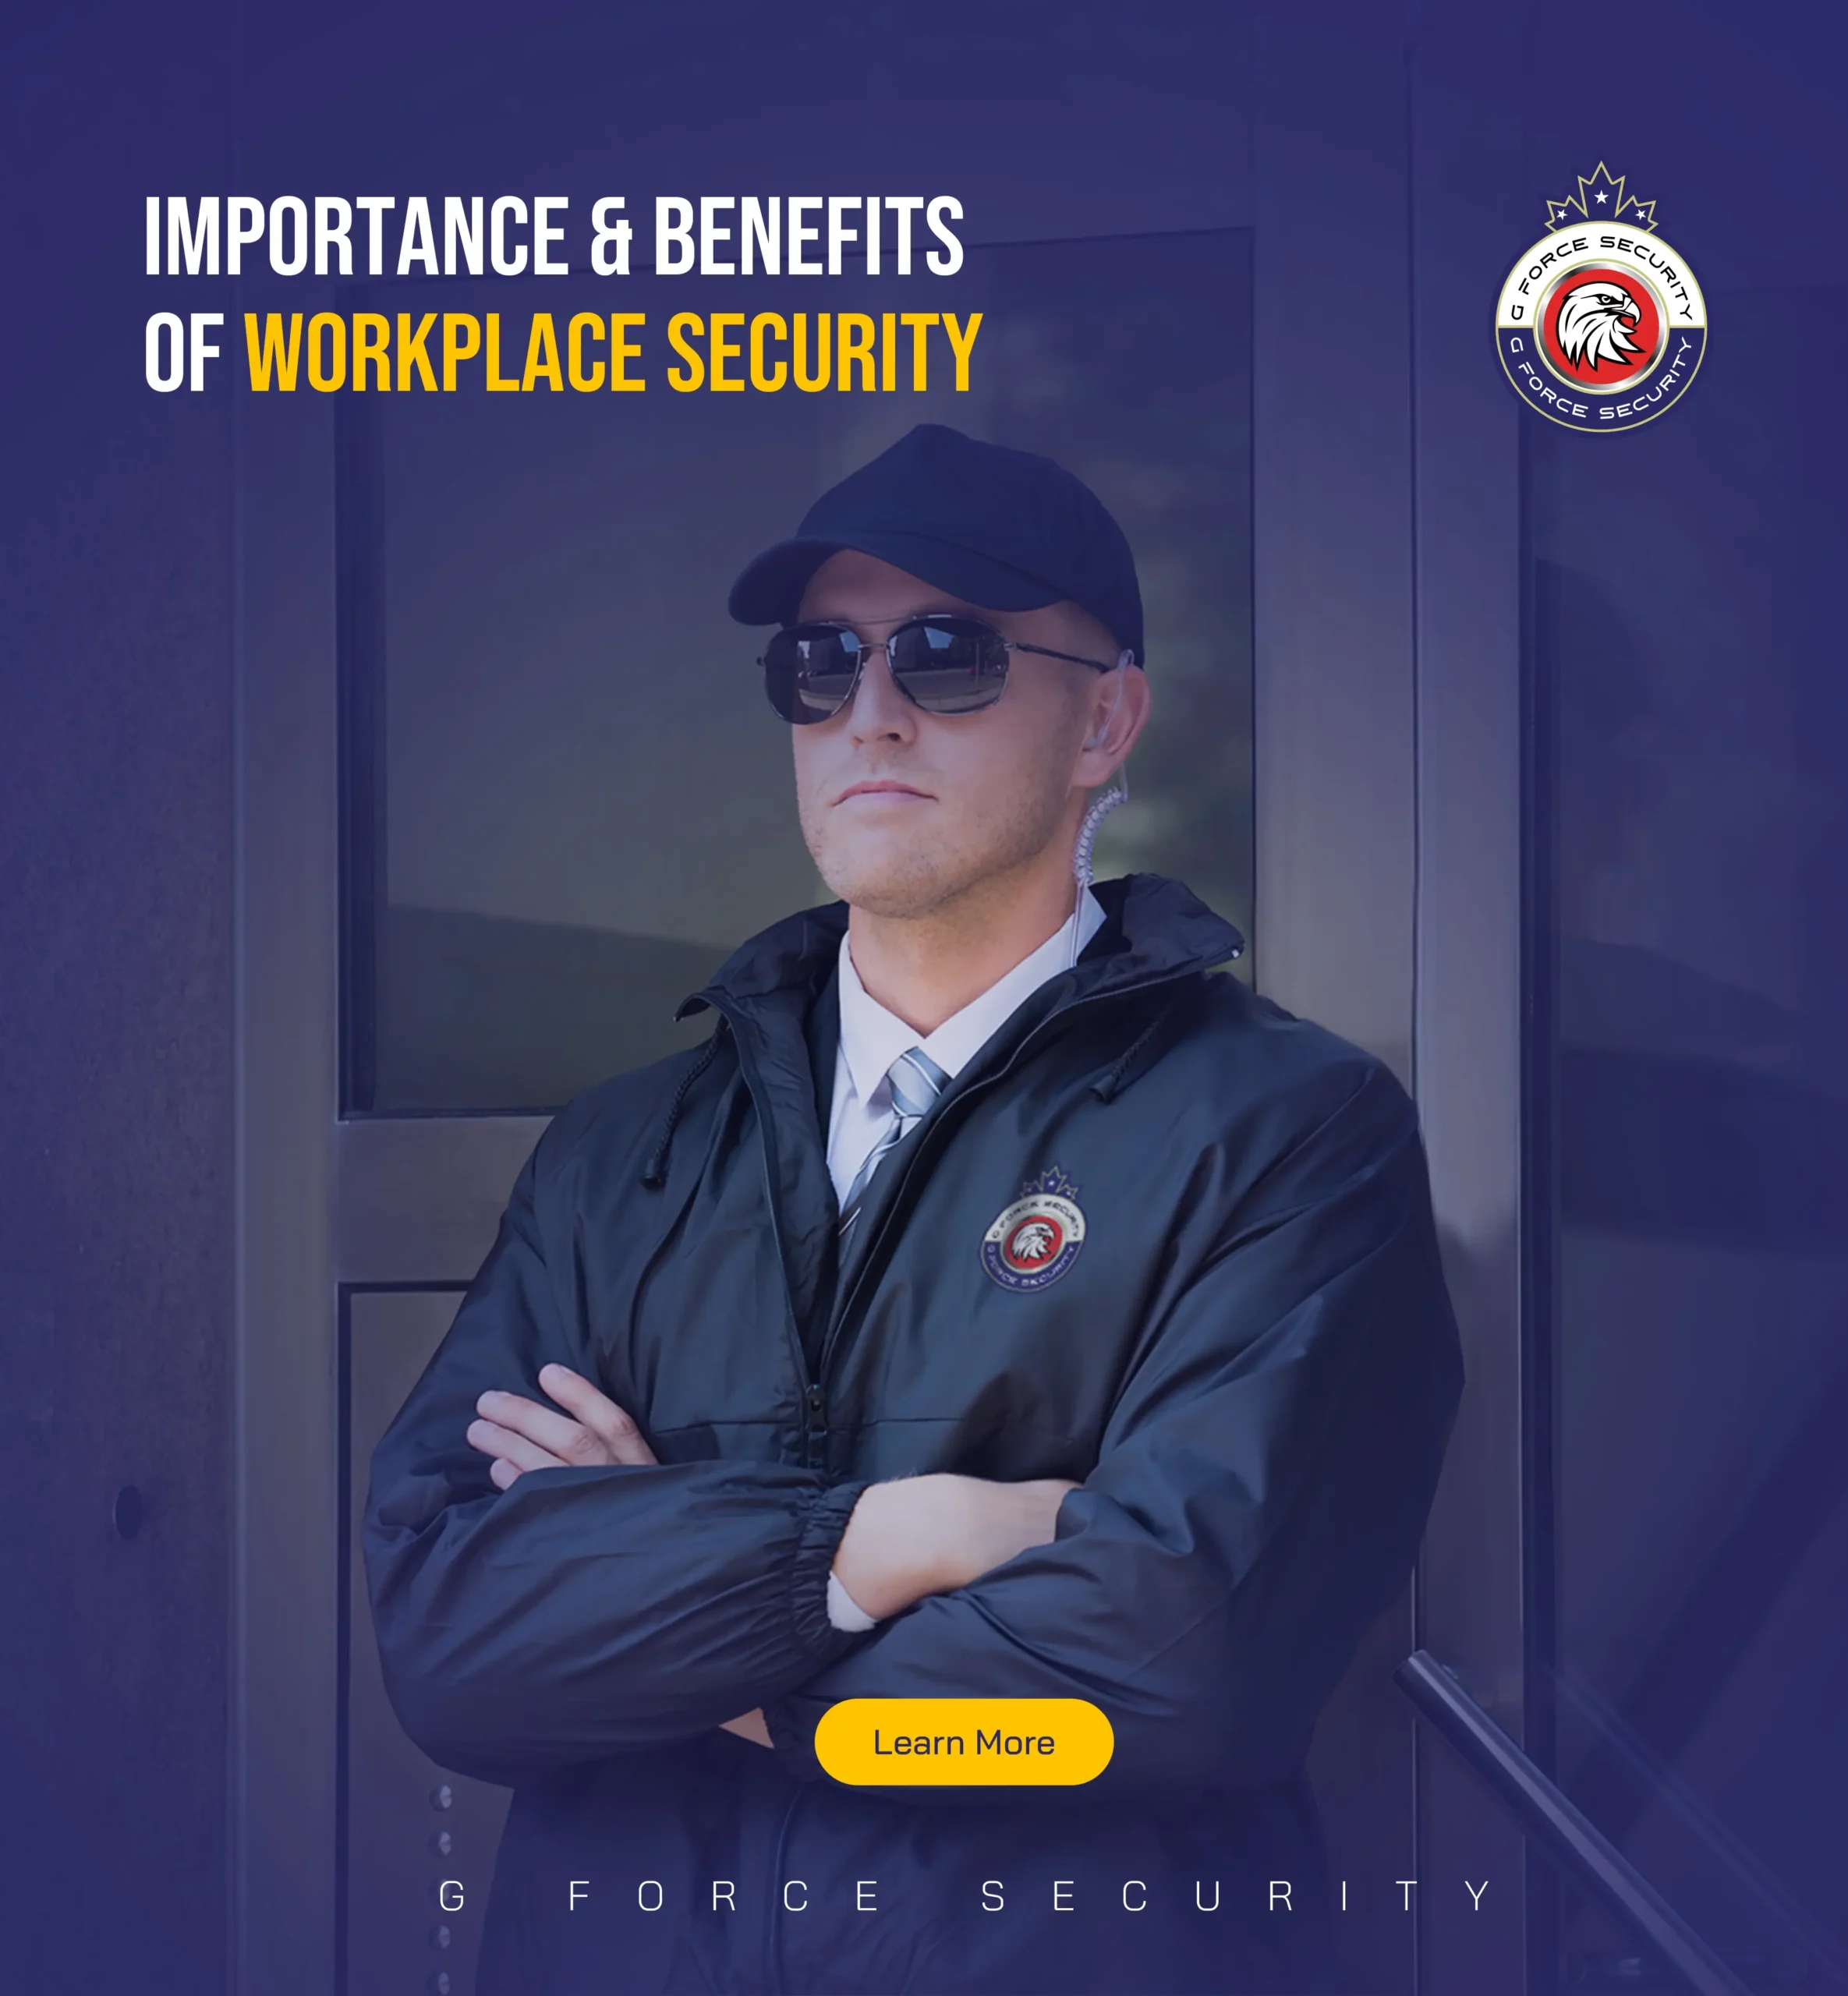 Importance & Benefits of Workplace Security